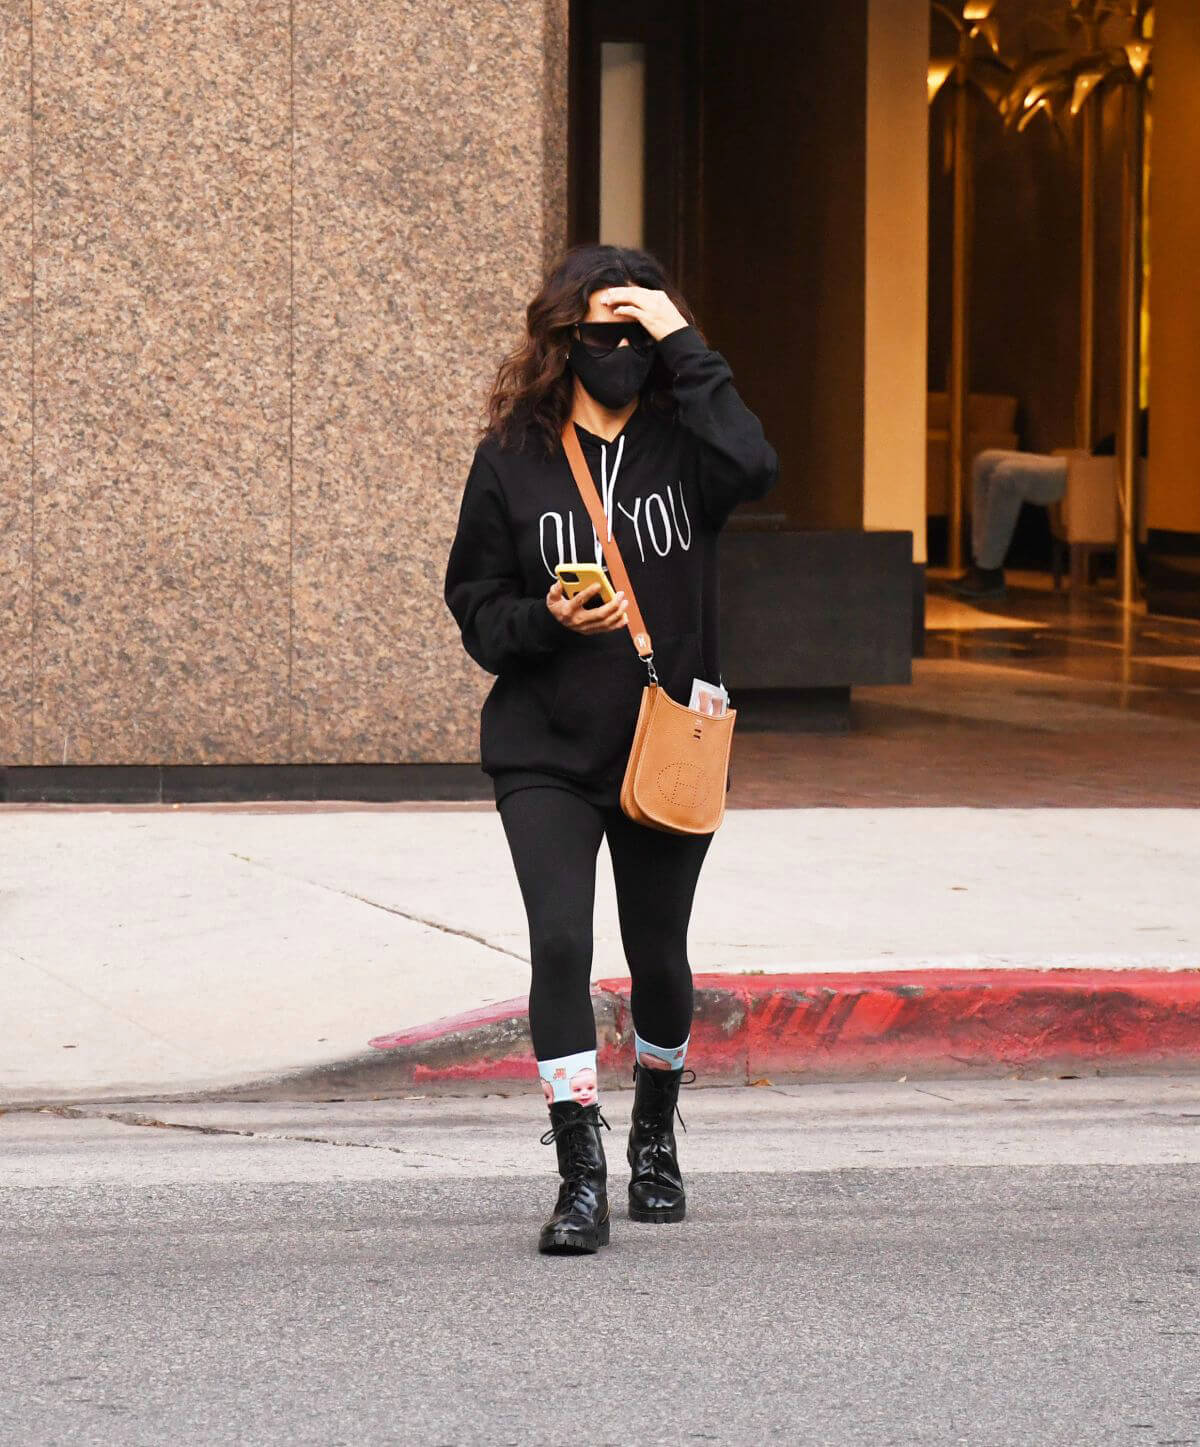 Eva Longoria seen Black Outfit and Wearing a Mask Out in Los Angeles 11/23/2020 8